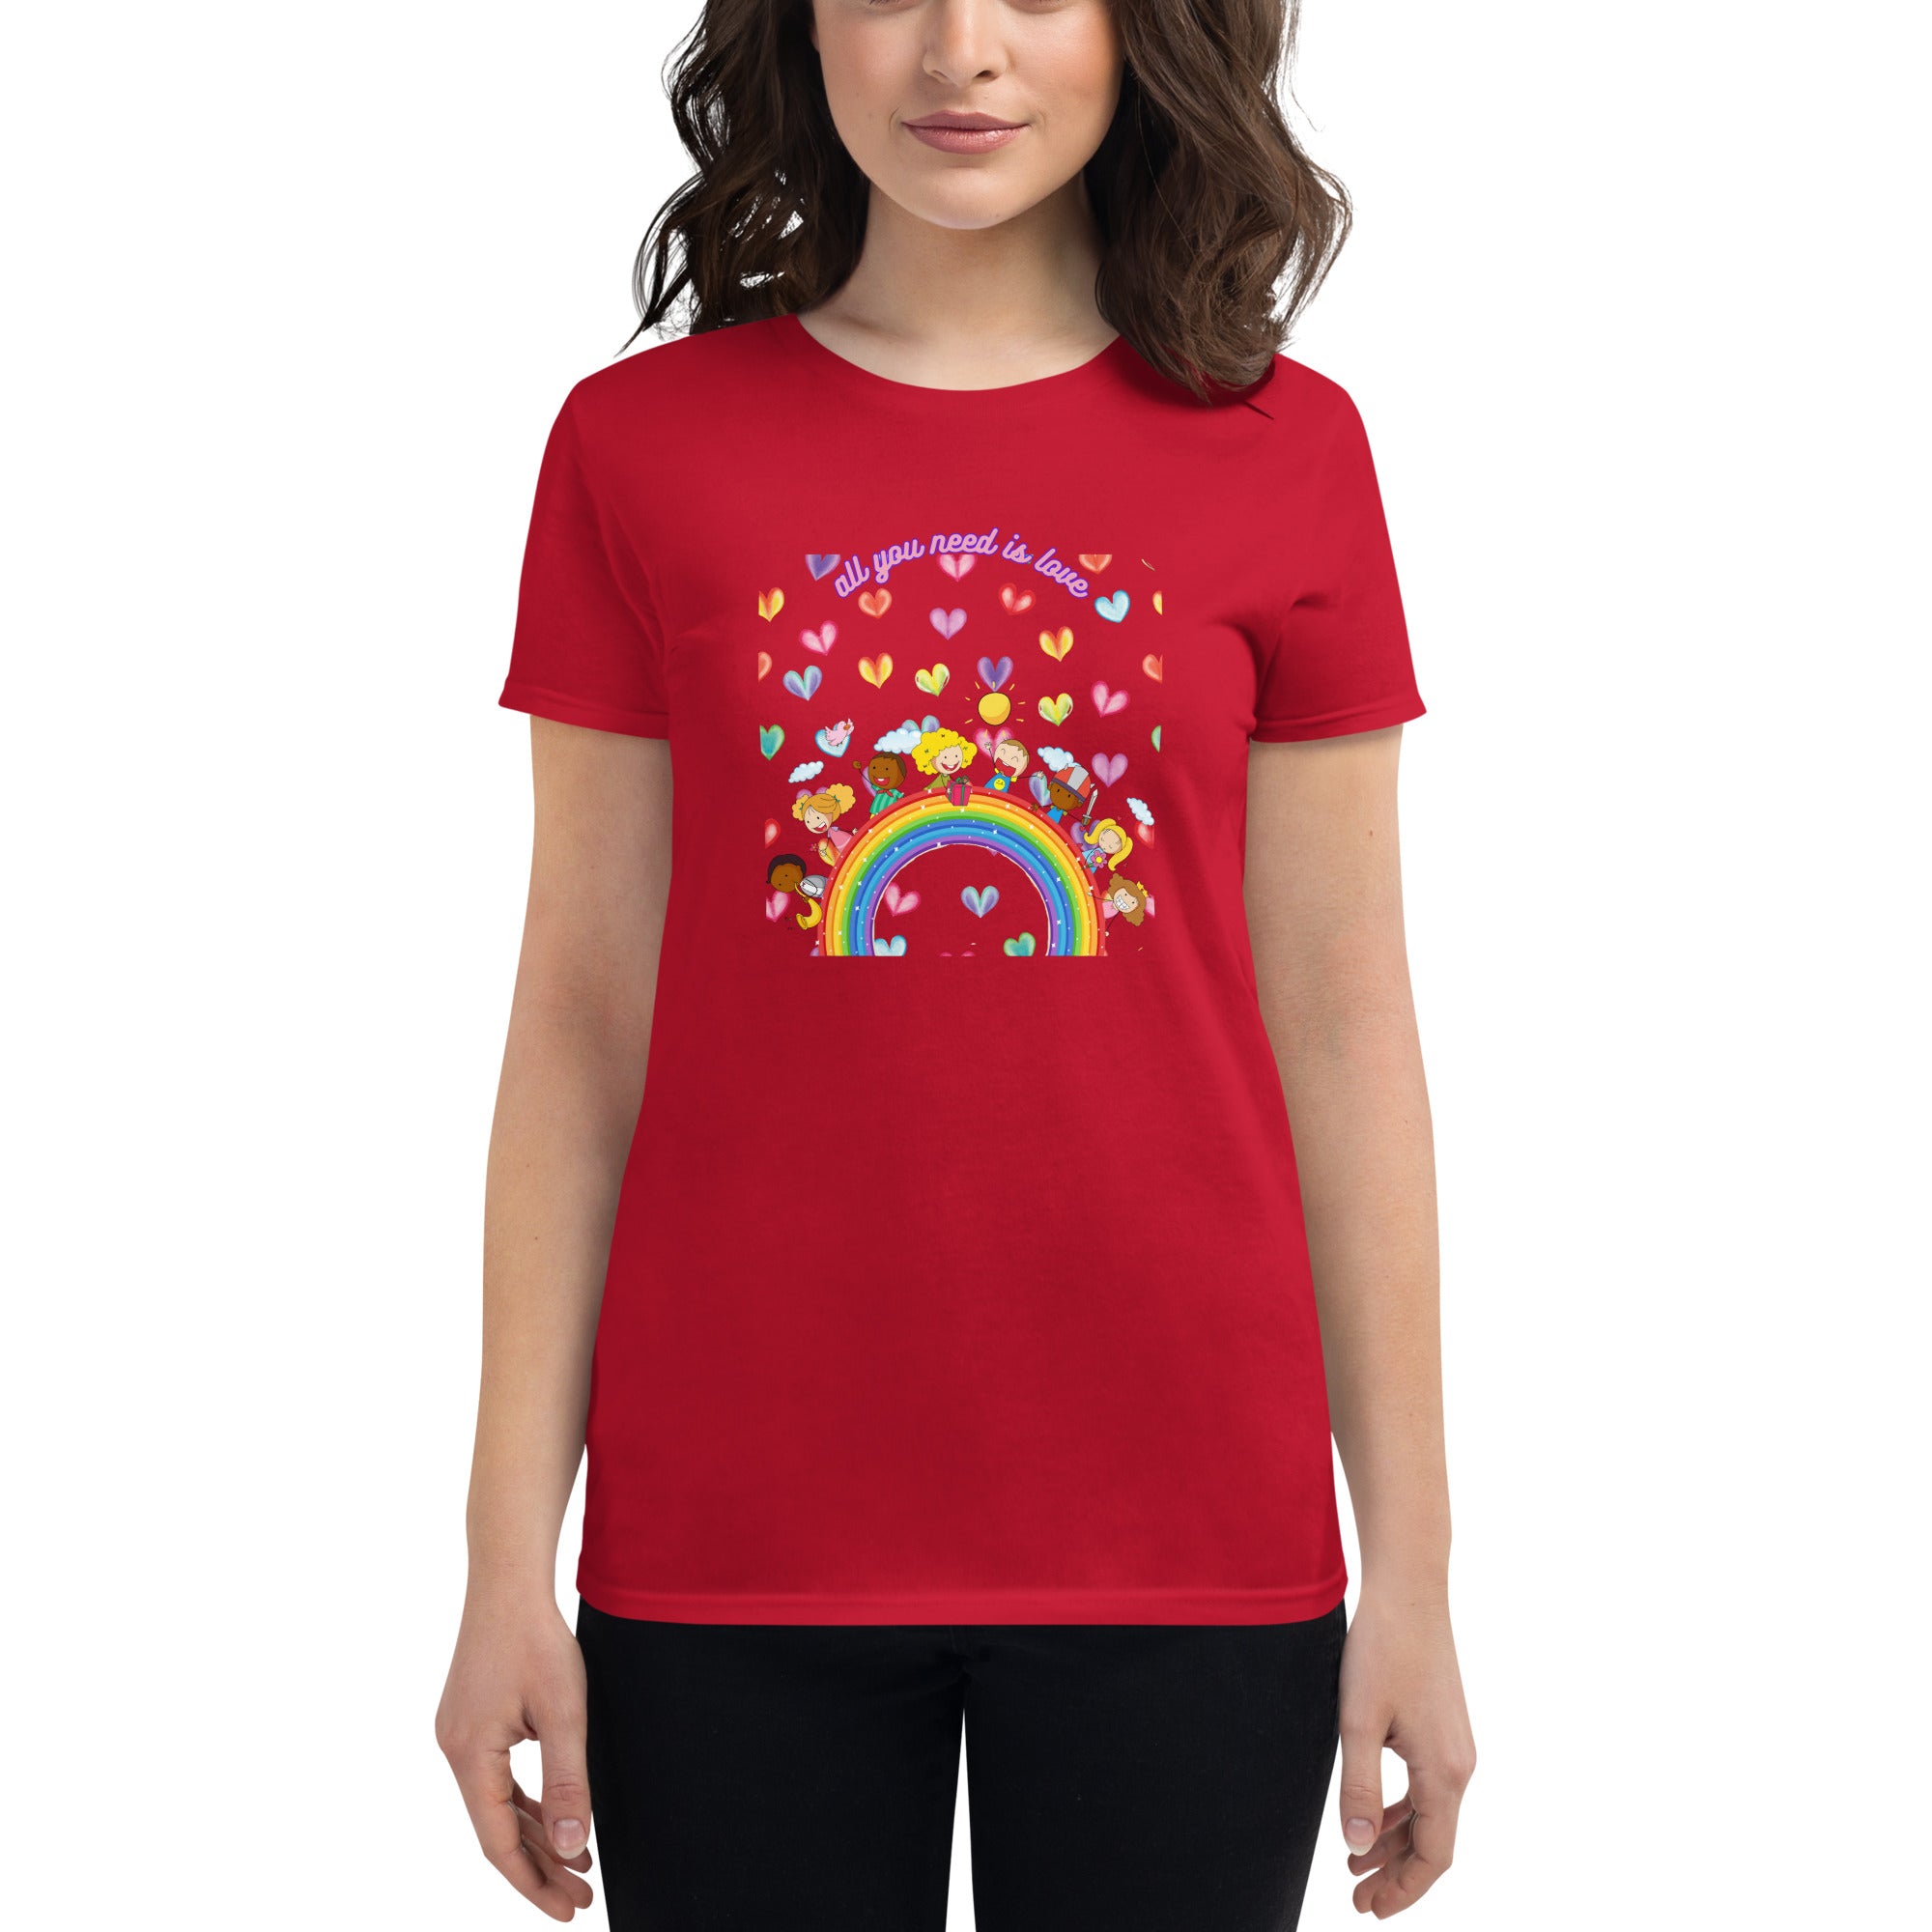 all.you.need.is.love-Women's short sleeve t-shirt